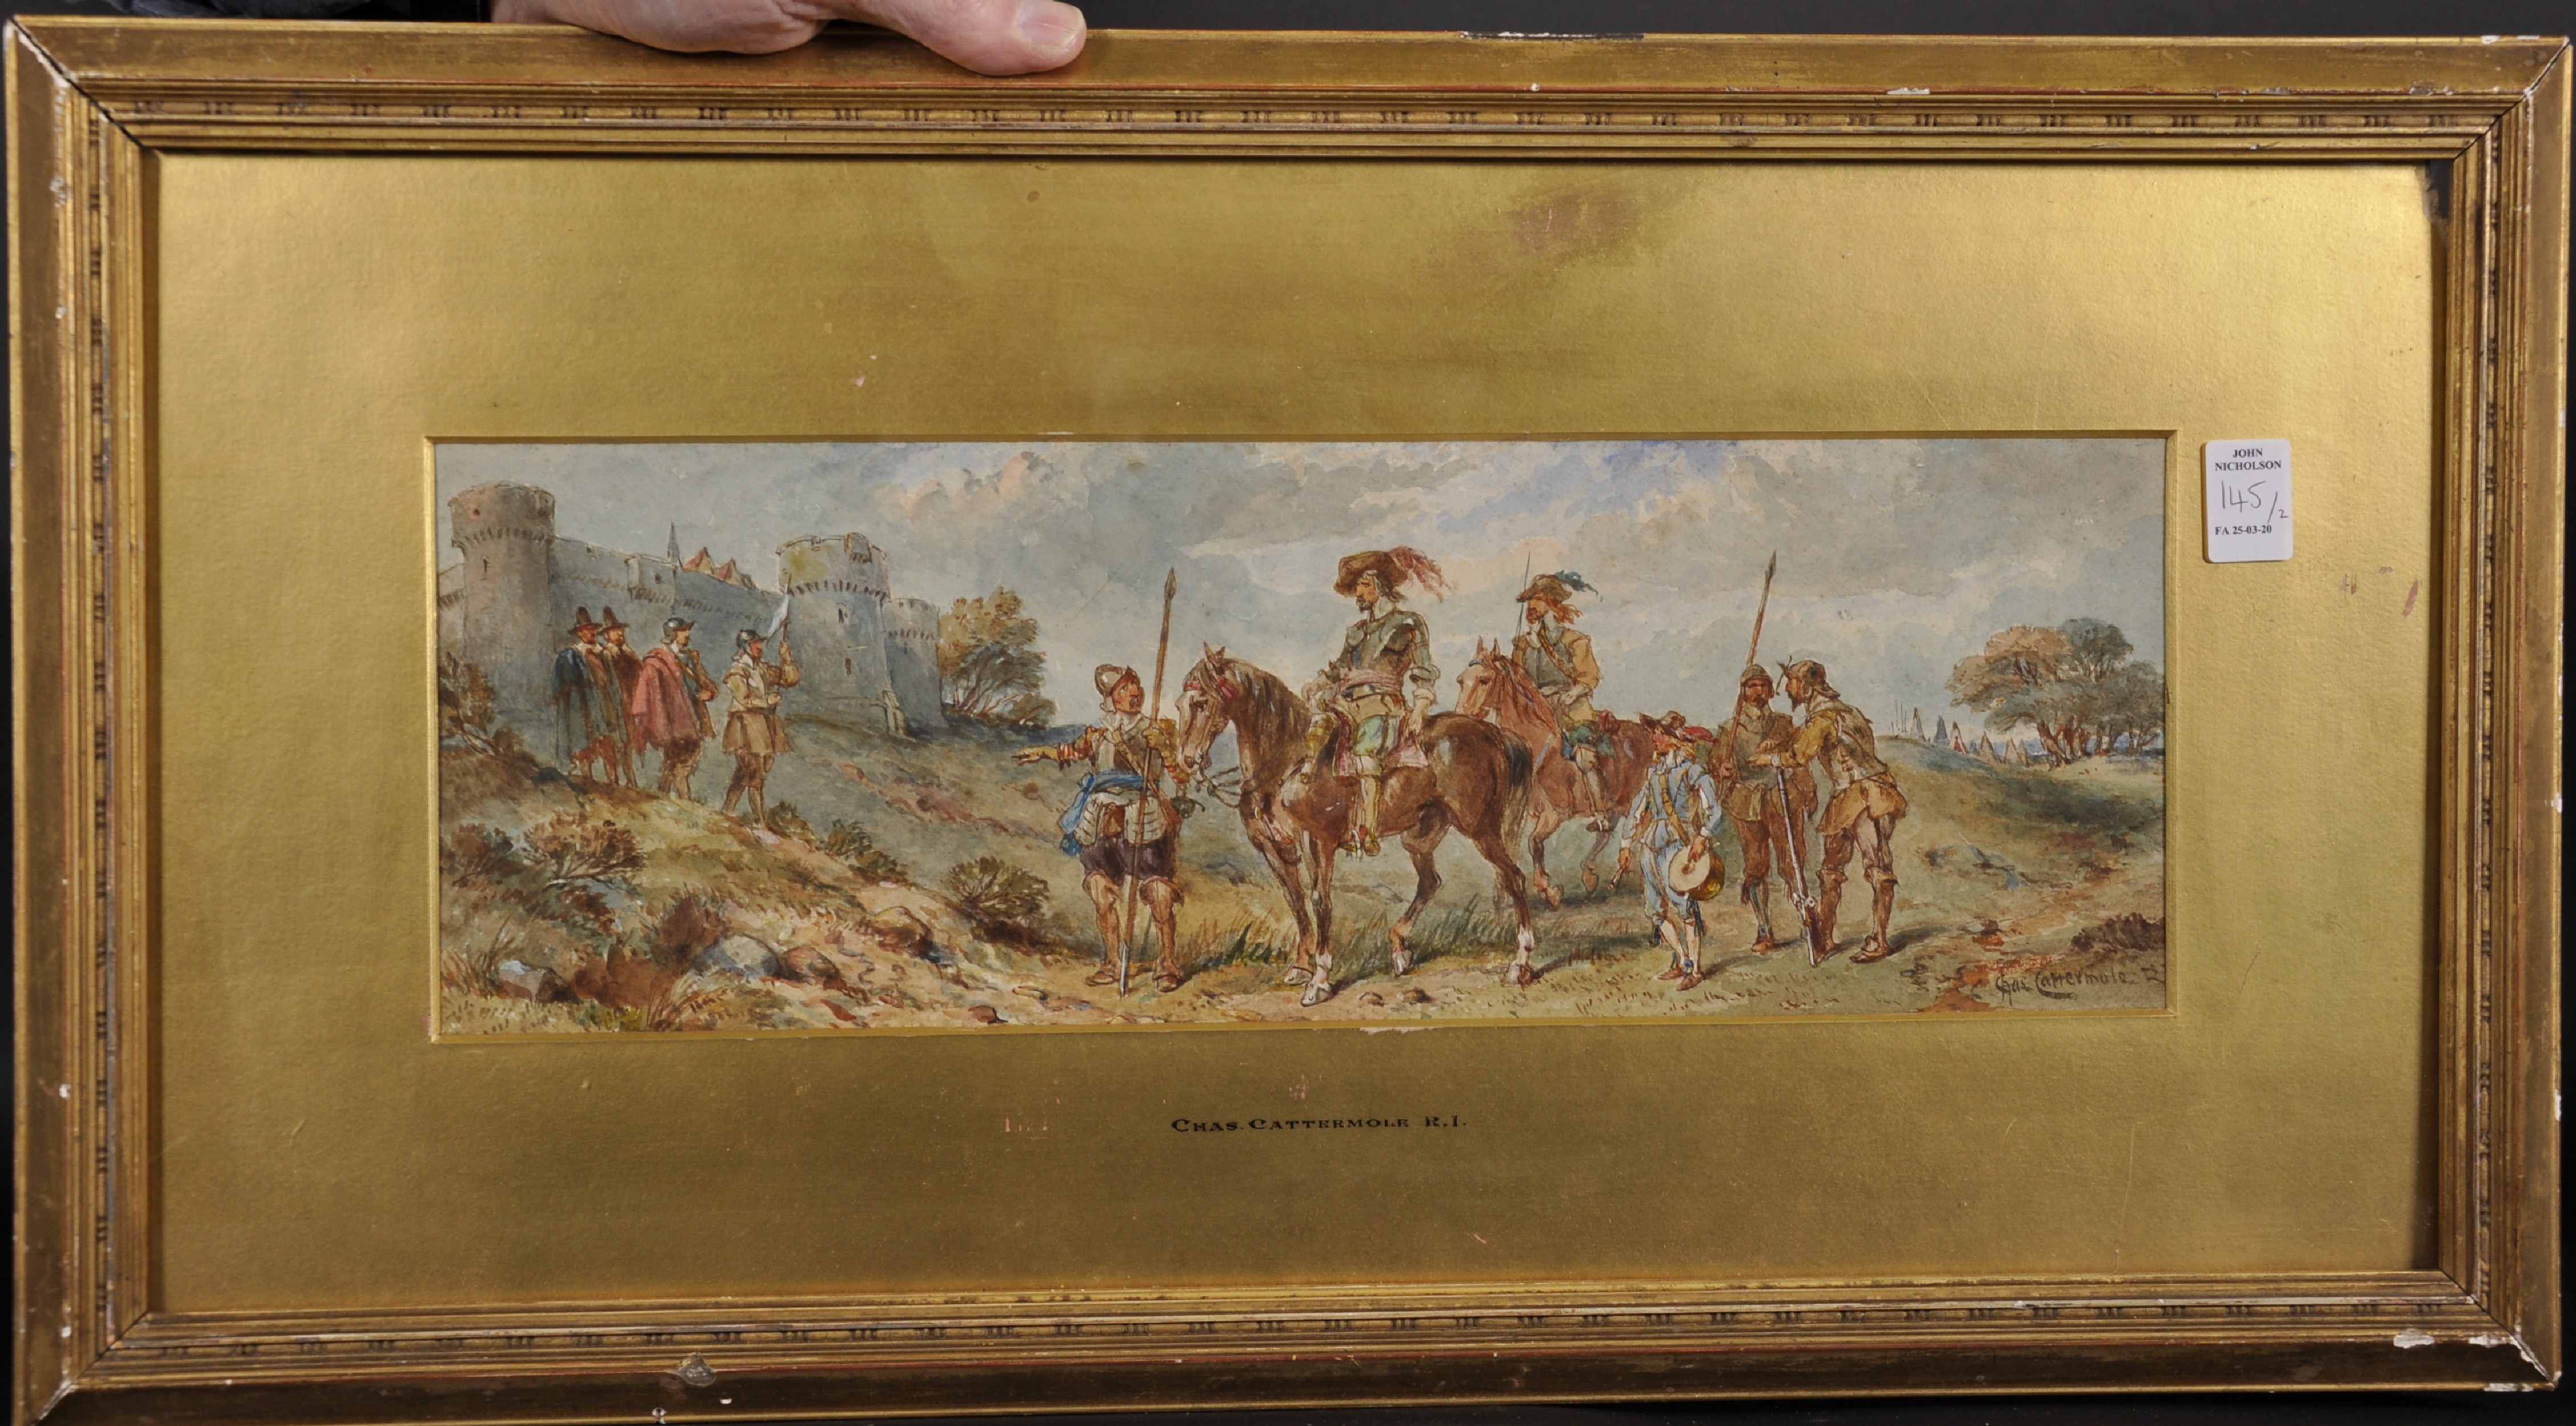 Charles Cattermole (1832-1900) British. The Cavalry Riding into Town, Watercolour, Signed and - Image 4 of 7